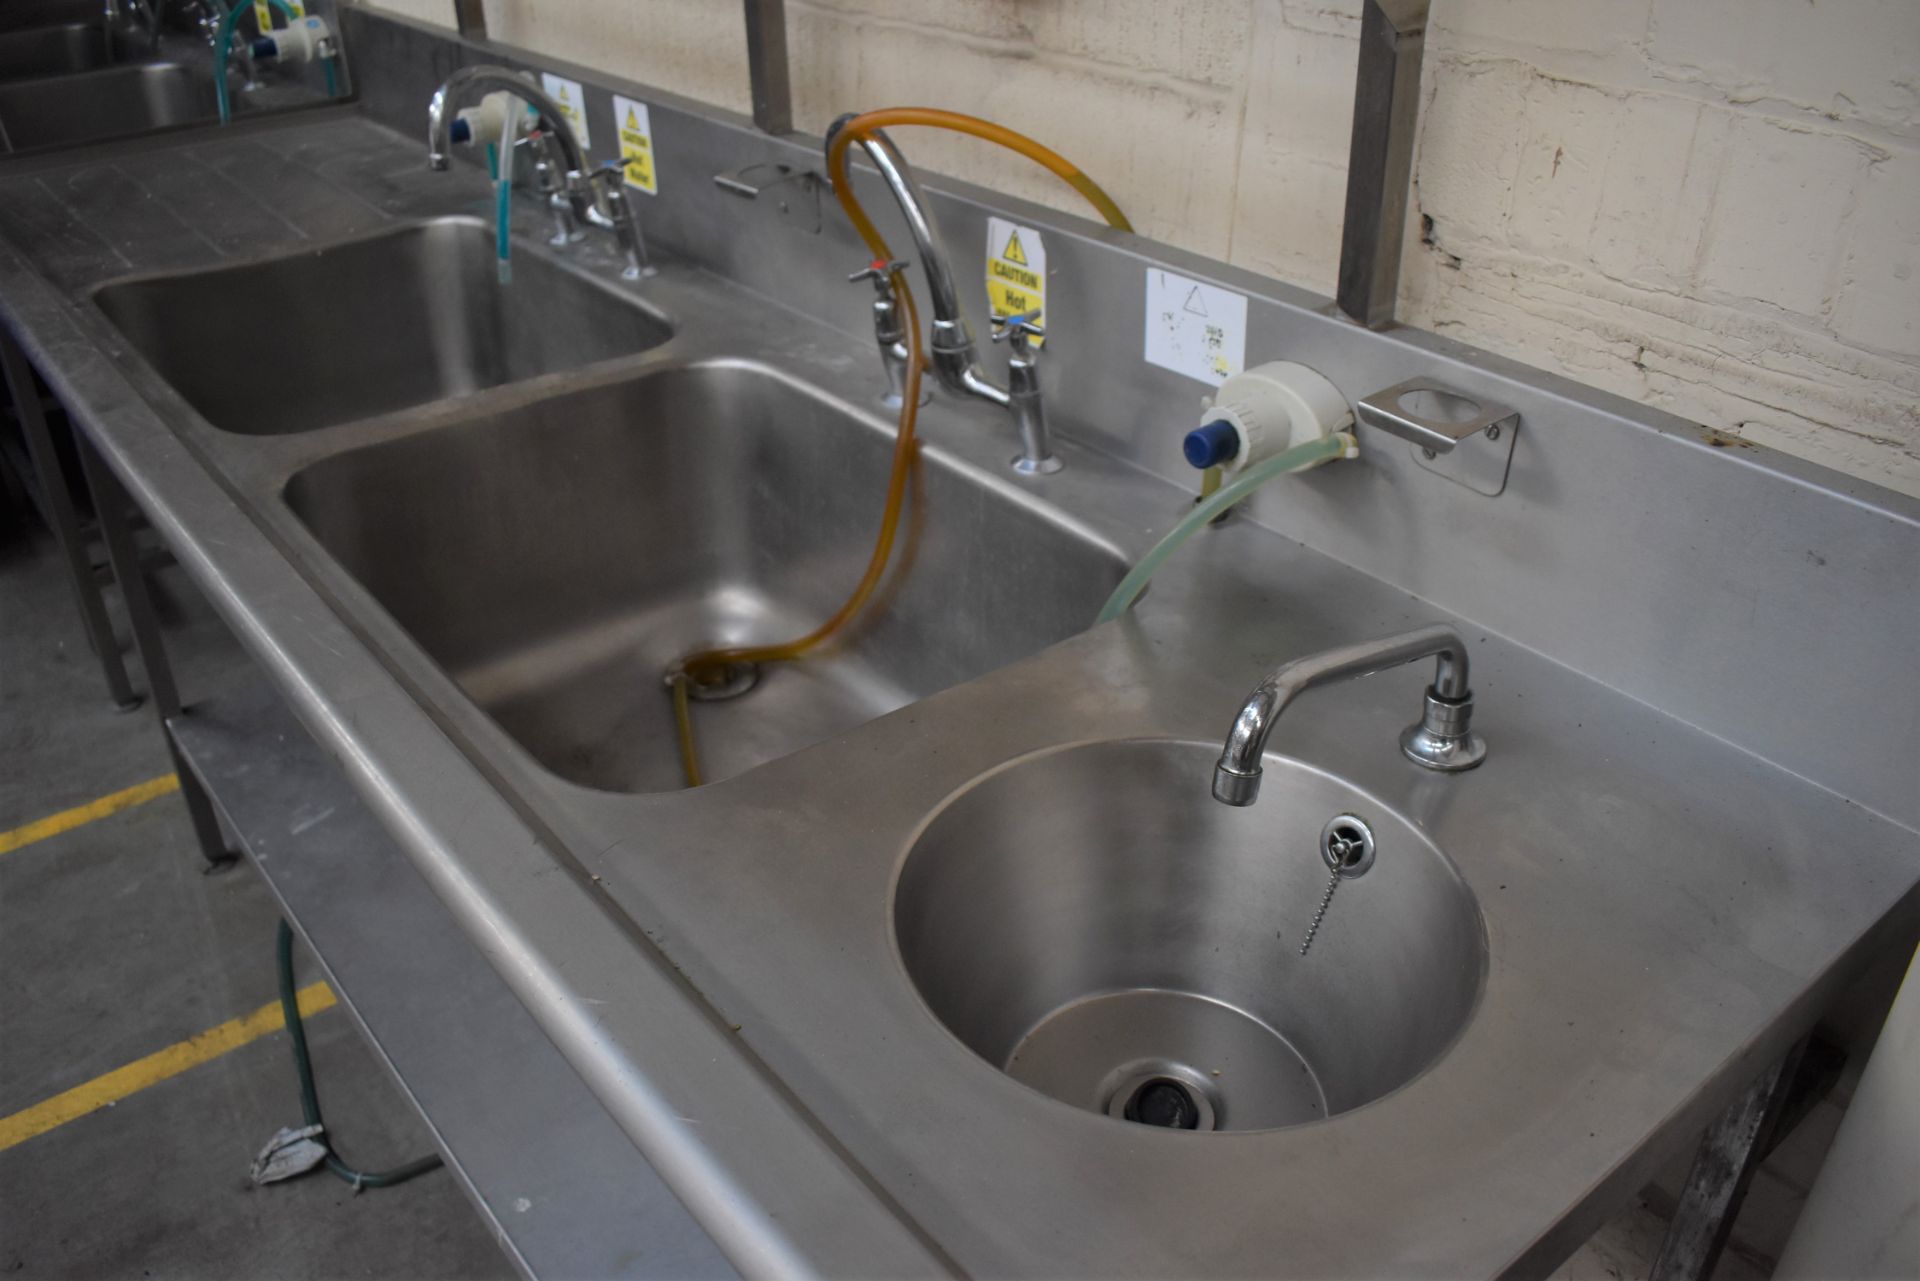 1 x Stainless Steel Commercial Wash Basin Unit With Twin Sink Bowl, Mixer Taps, Undershelf, - Image 7 of 8